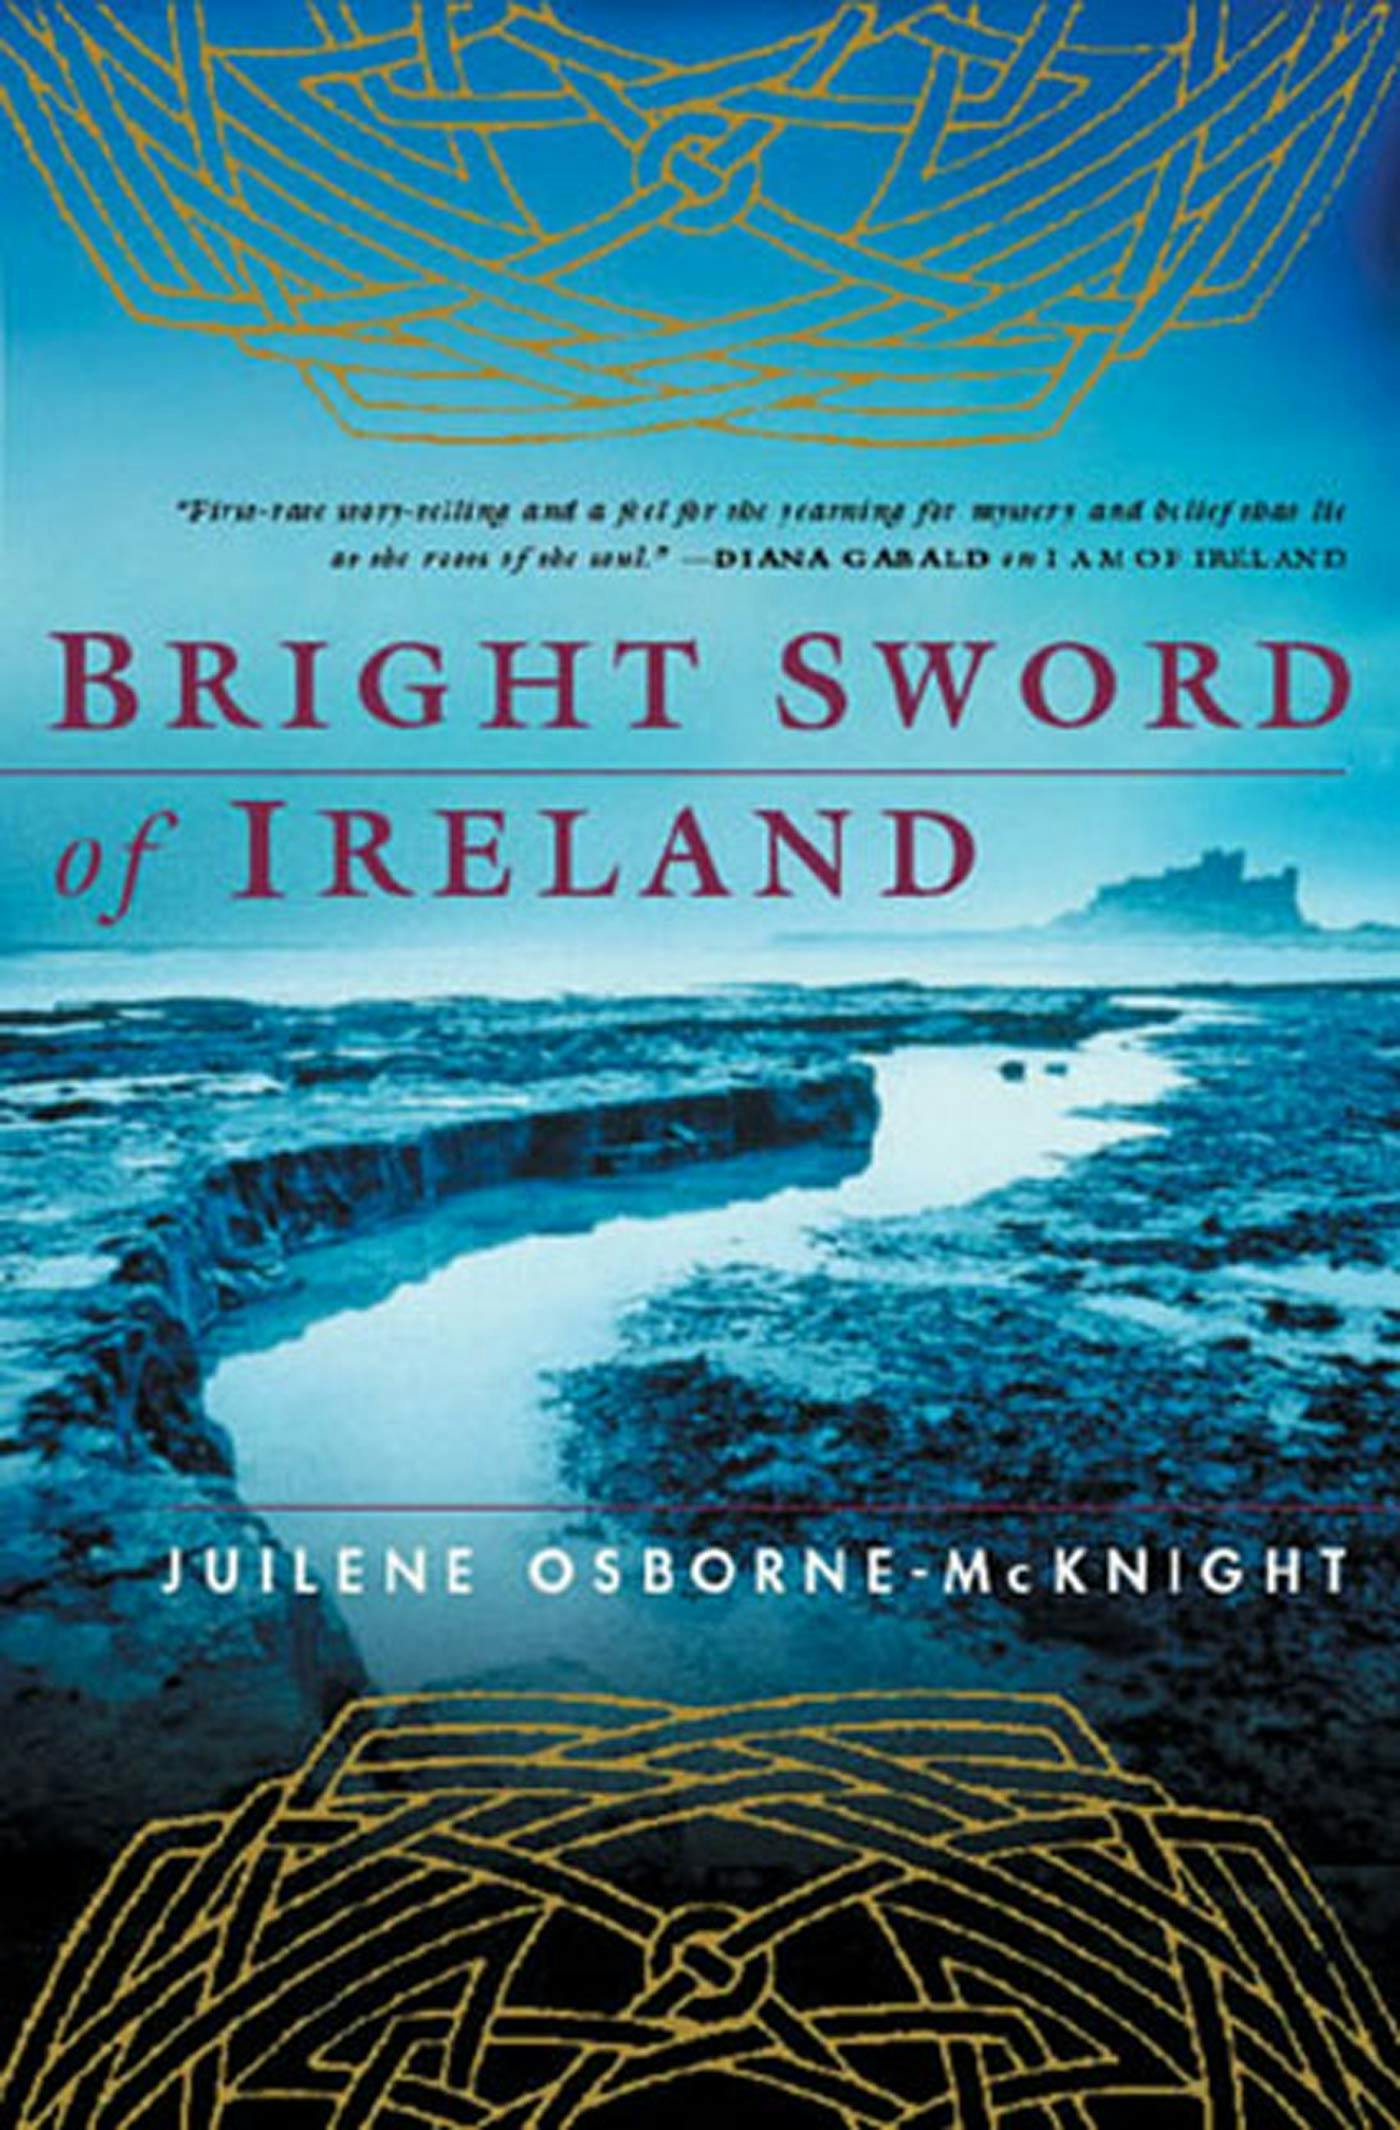 Cover for the book titled as: Bright Sword of Ireland